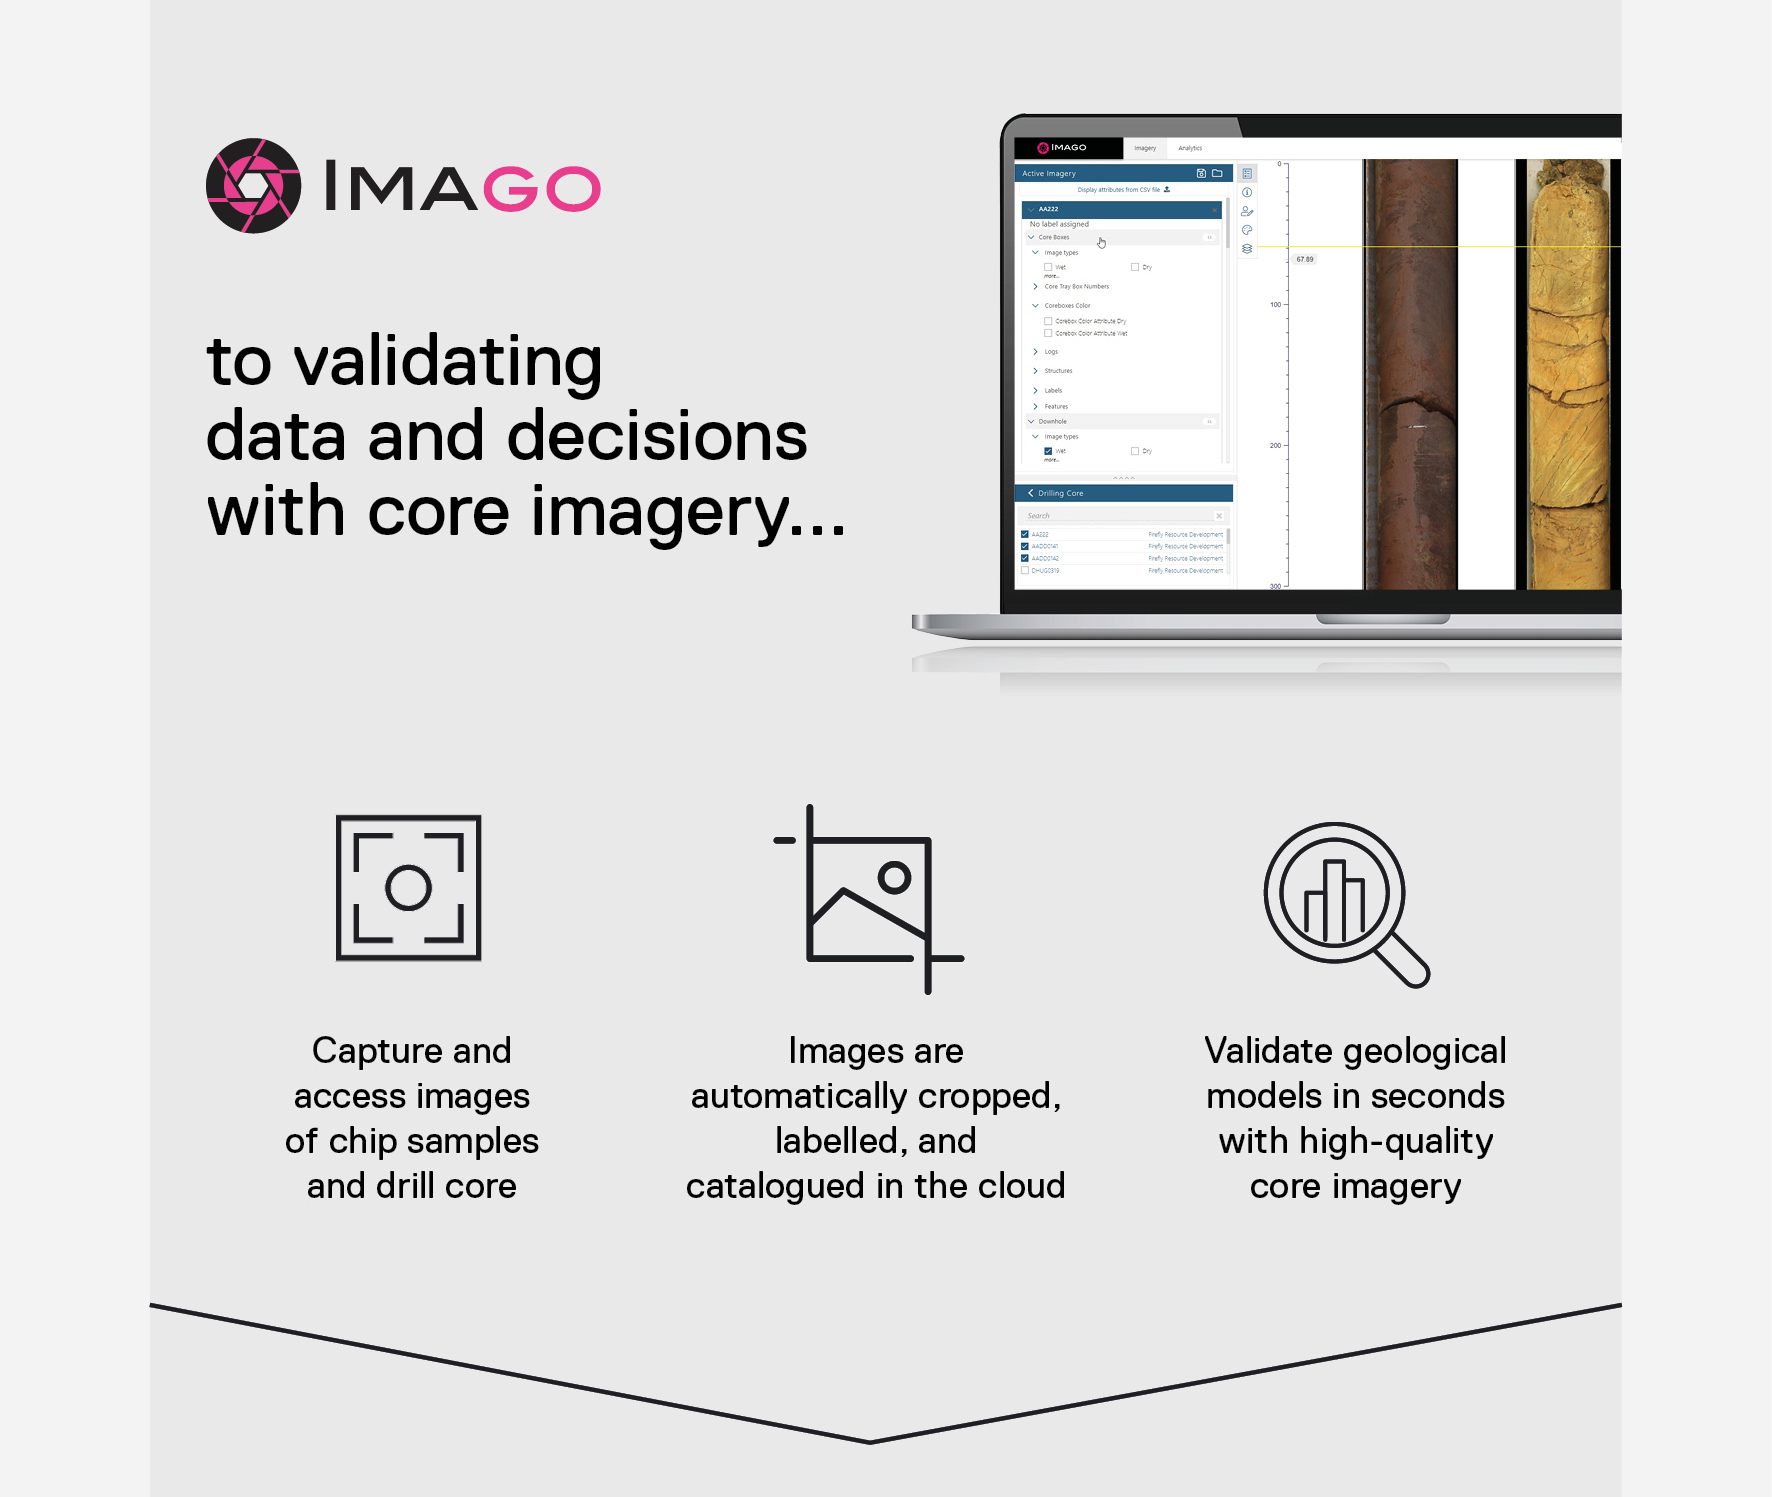 Infographic showing Imago core imagery management software benefits